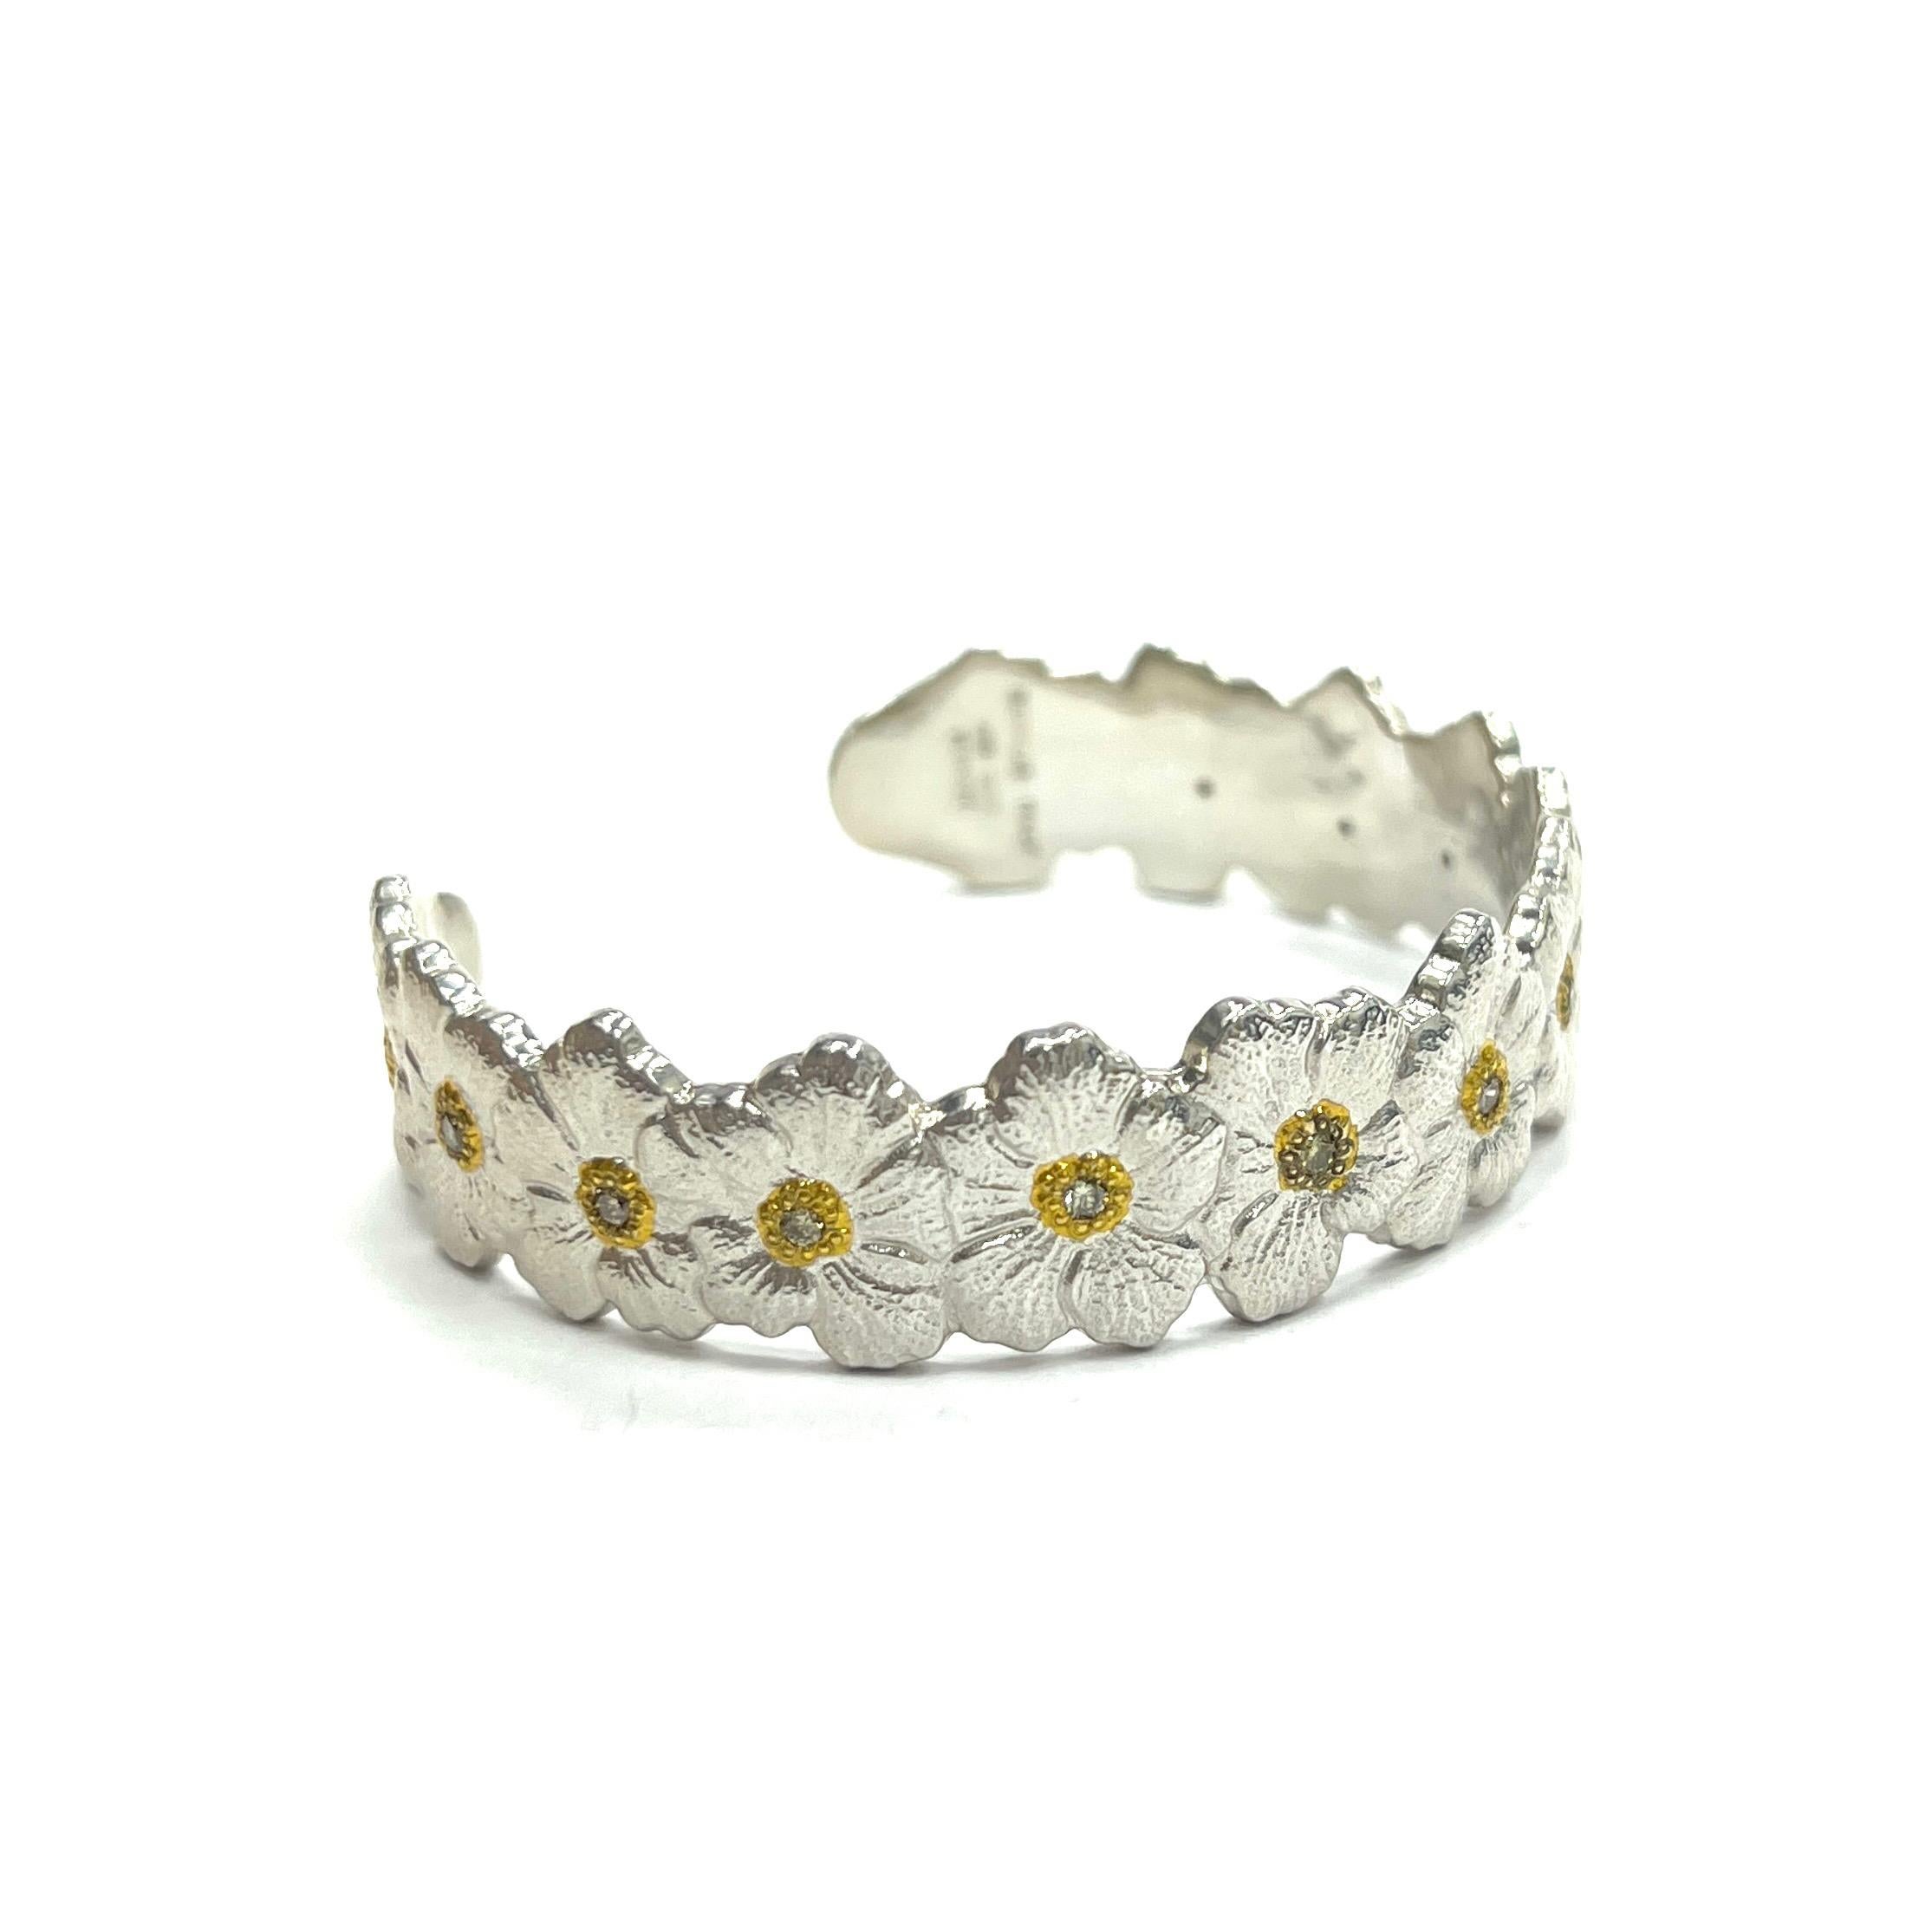 Buccellati Blossoms Diamond Cuff Bracelet, Italian

Blossom flowers made of sterling silver, round-cut diamonds of approximately 0.30 carat; marked Buccellati, Italy, 925, Sterling

Size: width 0.63 inch; inner circumference 6.75 inches
Total